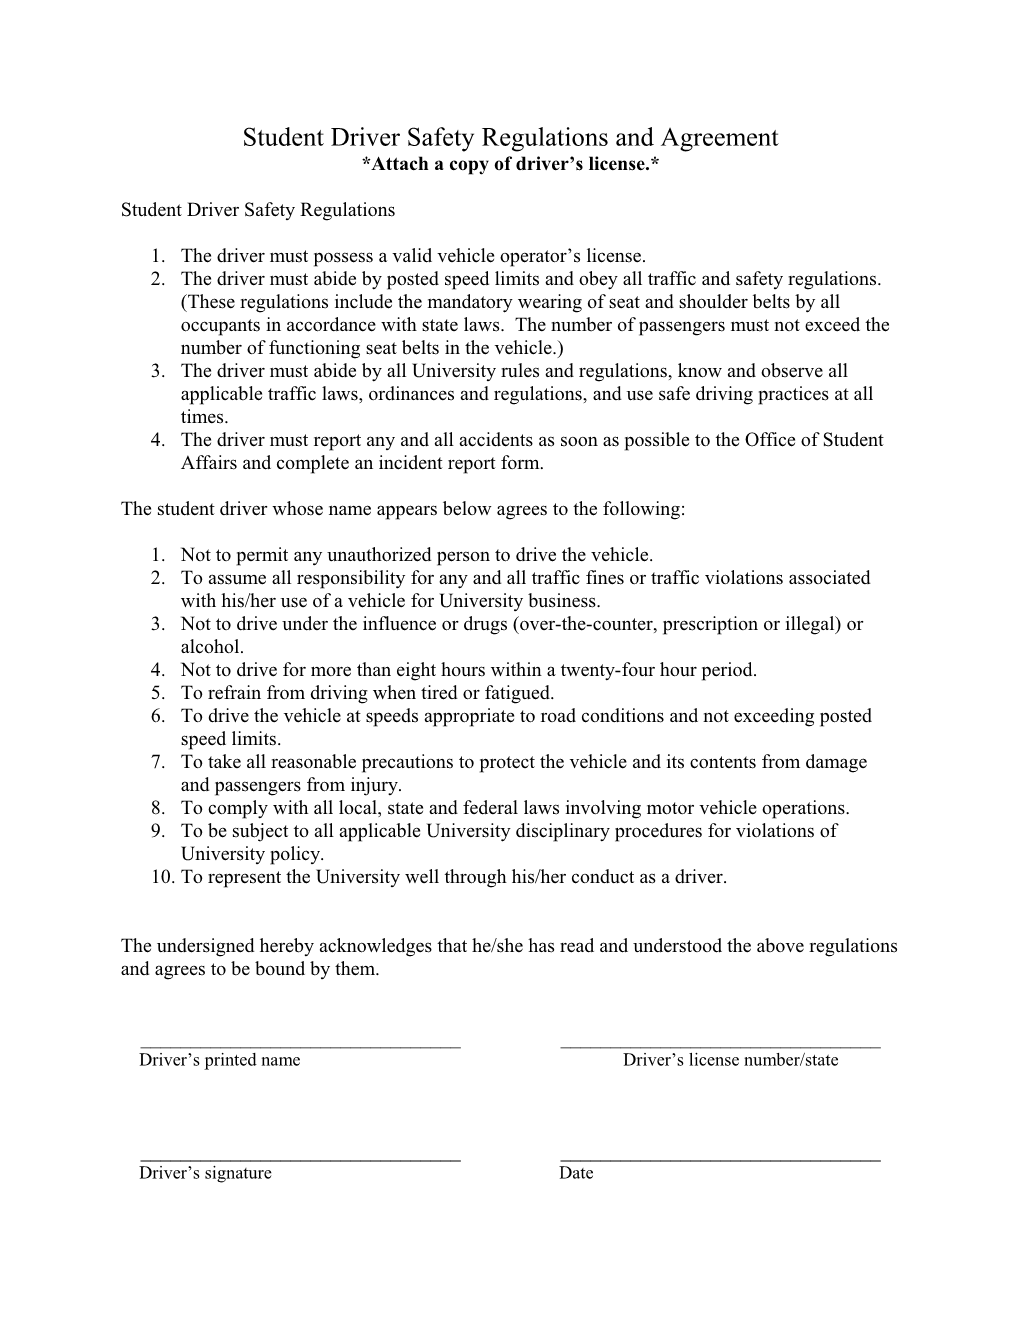 Student Driver Safety Regulations and Agreement